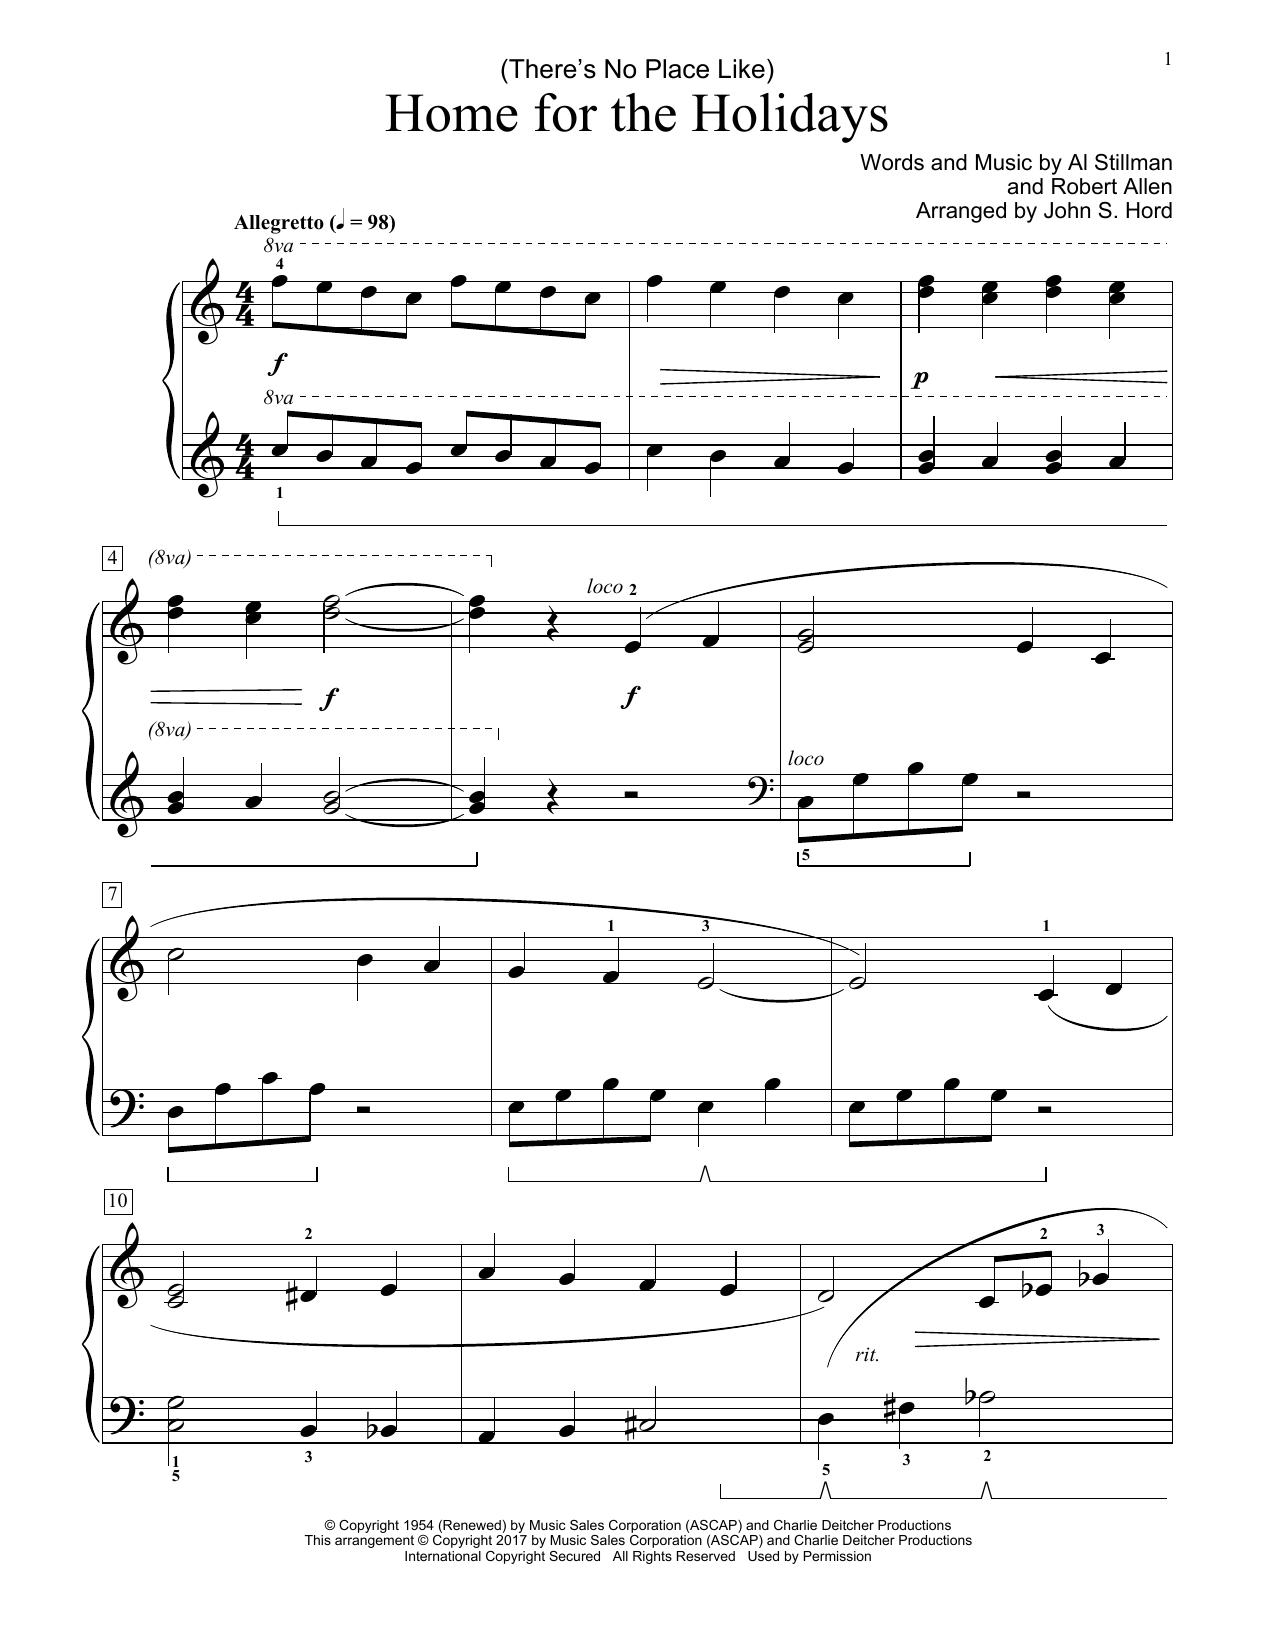 Download John S. Hord (There's No Place Like) Home For The Ho Sheet Music